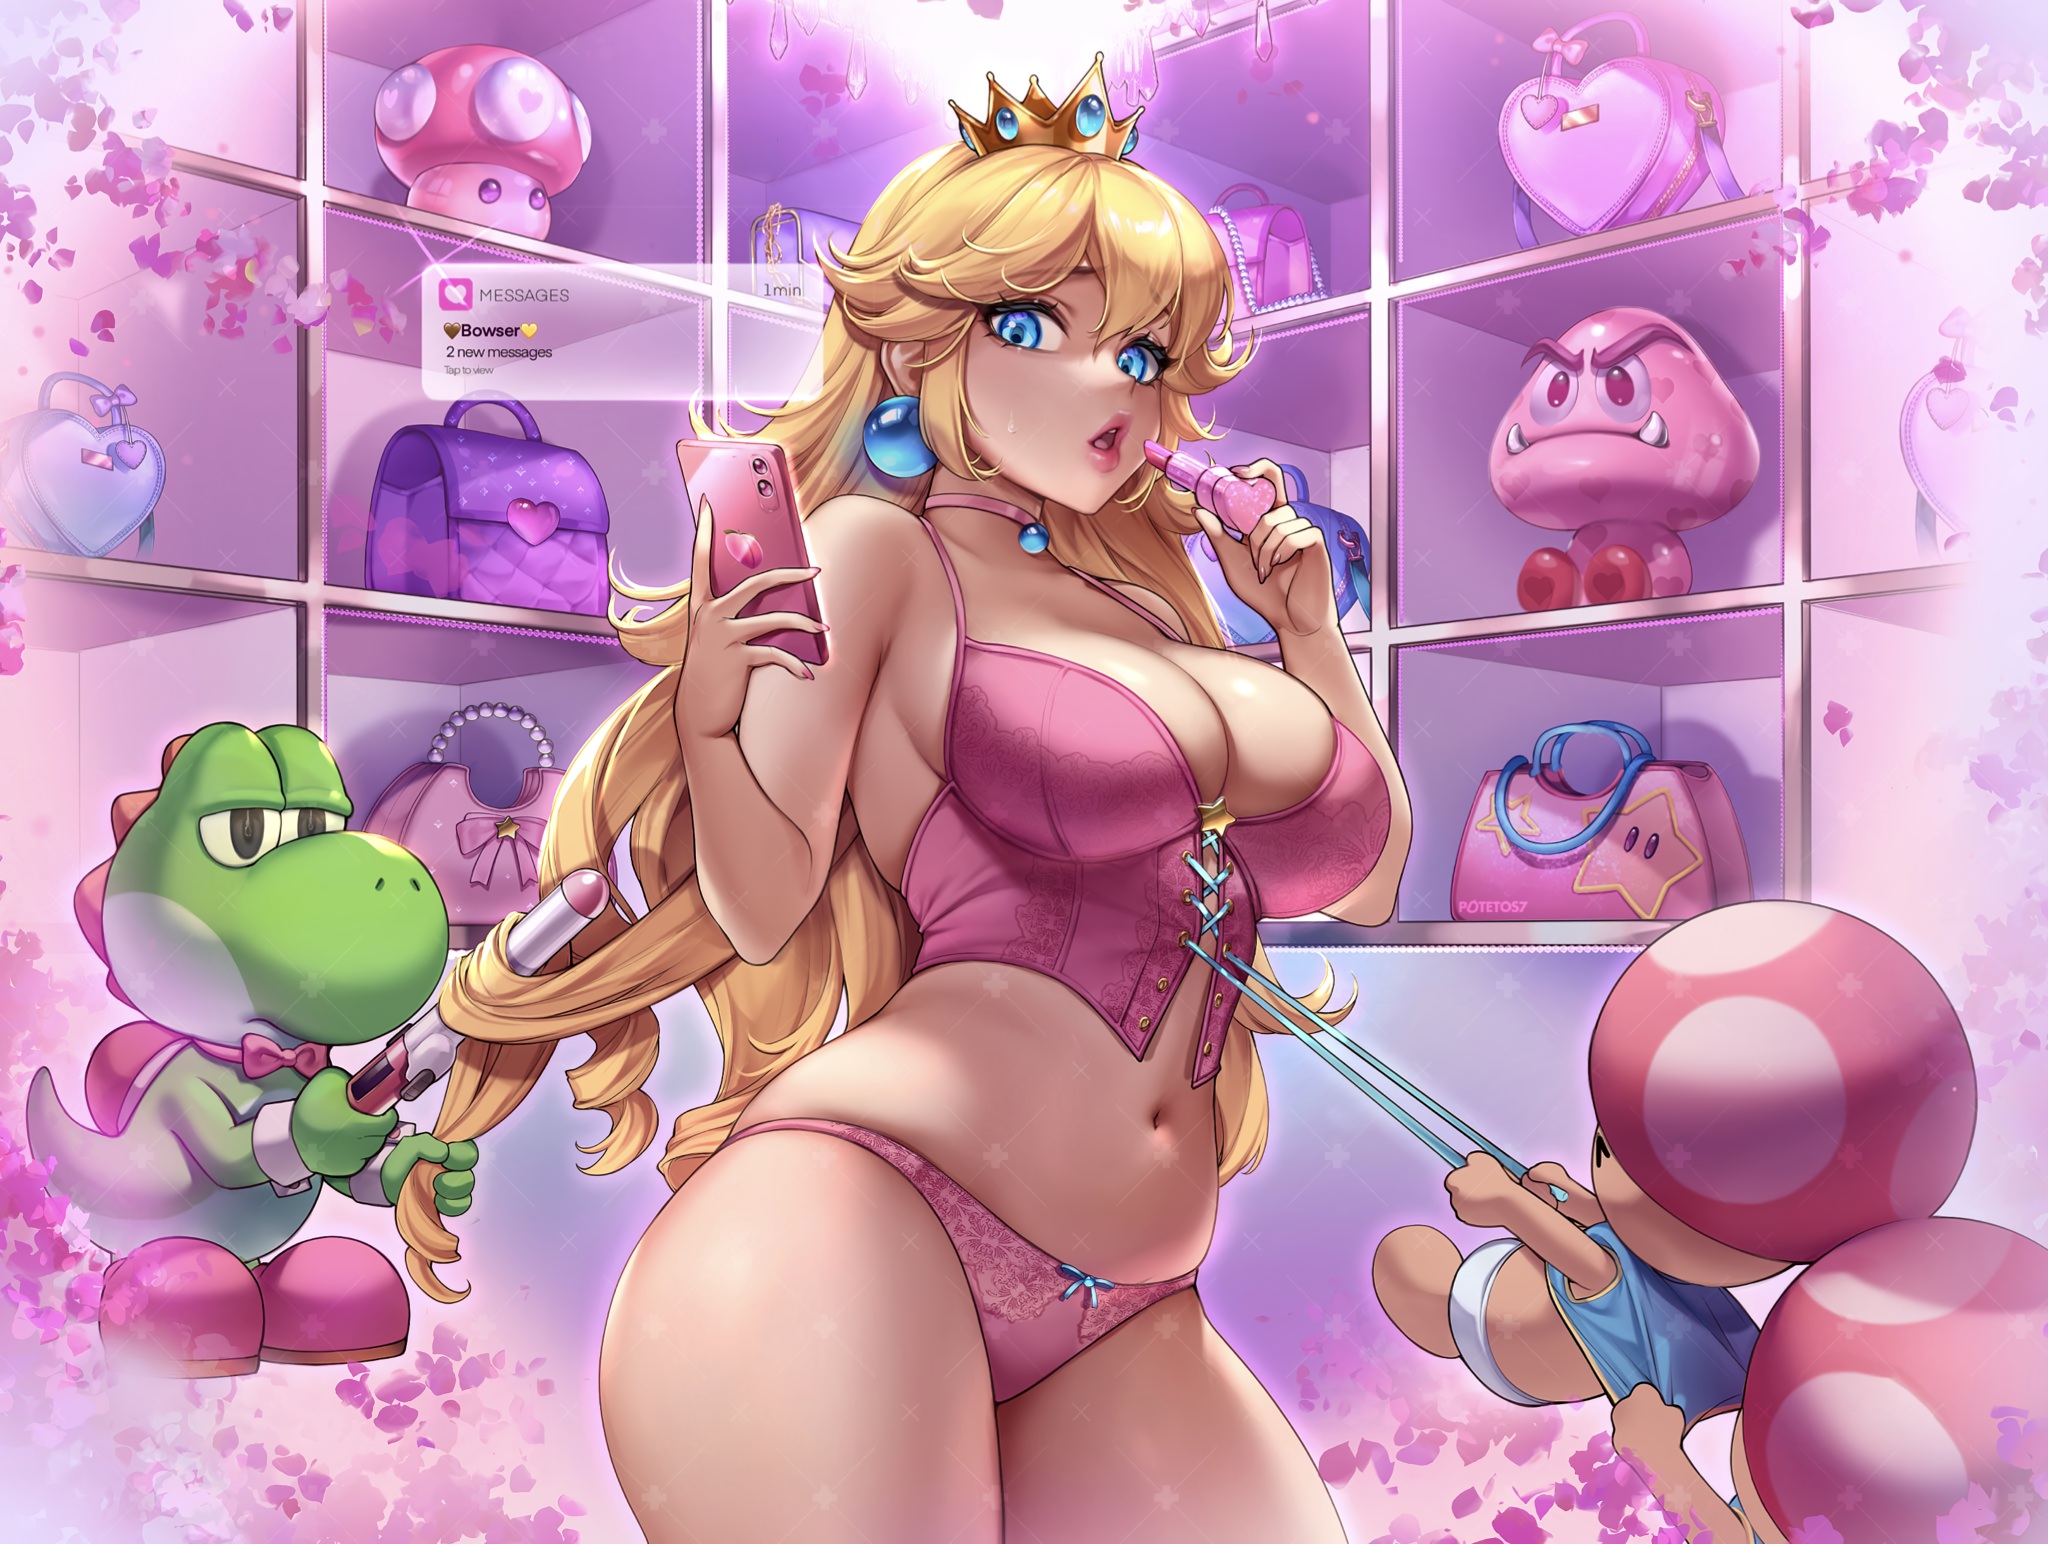 Anime 2048x1544 Super Mario underwear video game girls blonde video game characters bra Princess Peach cleavage pink underwear corset pink lingerie big boobs pink panties potetos7 women indoors phone Yoshi Toad (character) Goomba blue eyes panties watermarked Nintendo open mouth pulling clothing purse pink lipstick smartphone crown petals curvy